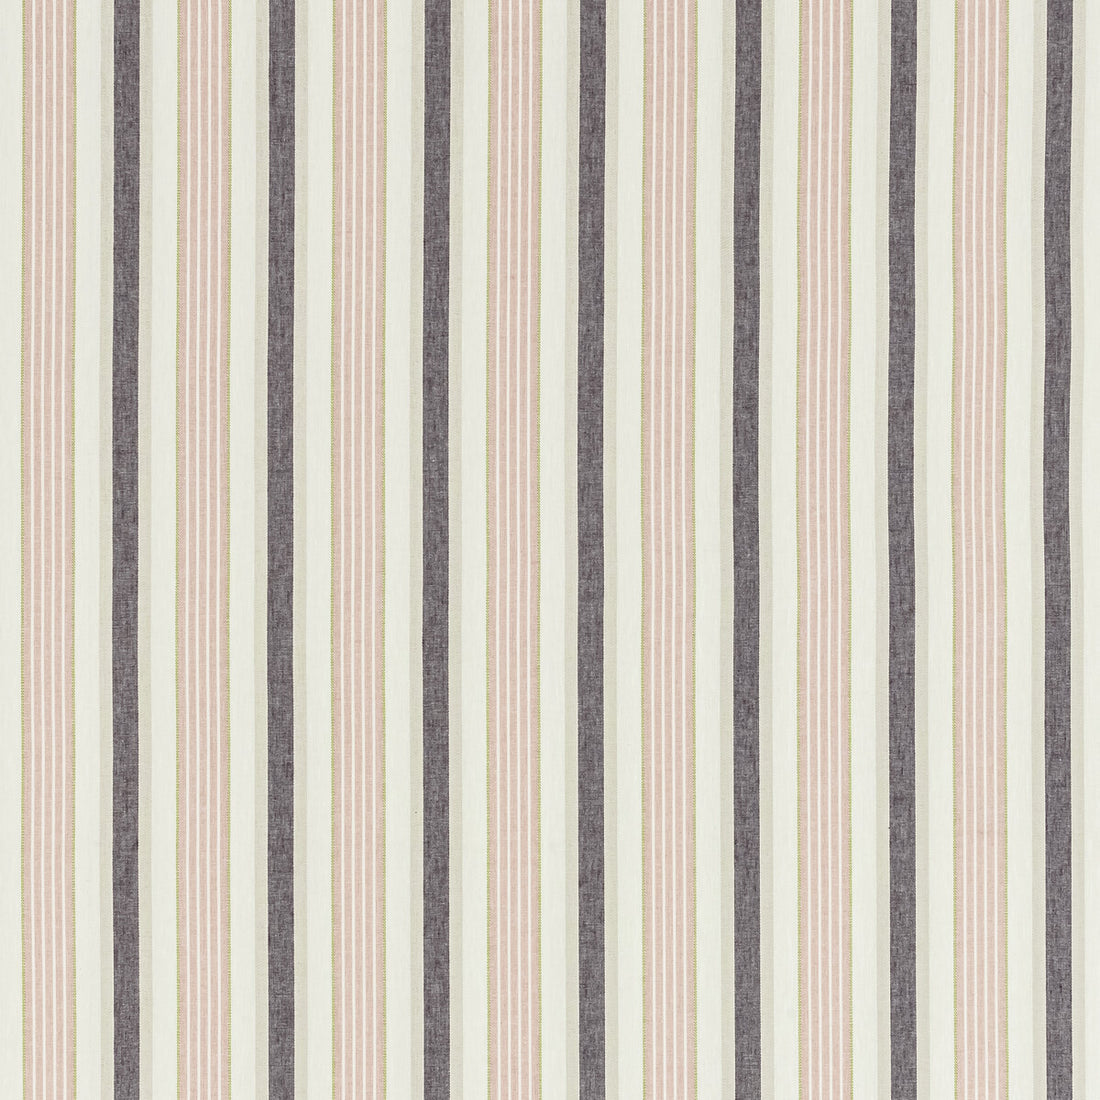 Belvoir fabric in blush/damson color - pattern F1430/01.CAC.0 - by Clarke And Clarke in the Clarke &amp; Clarke Botanist collection